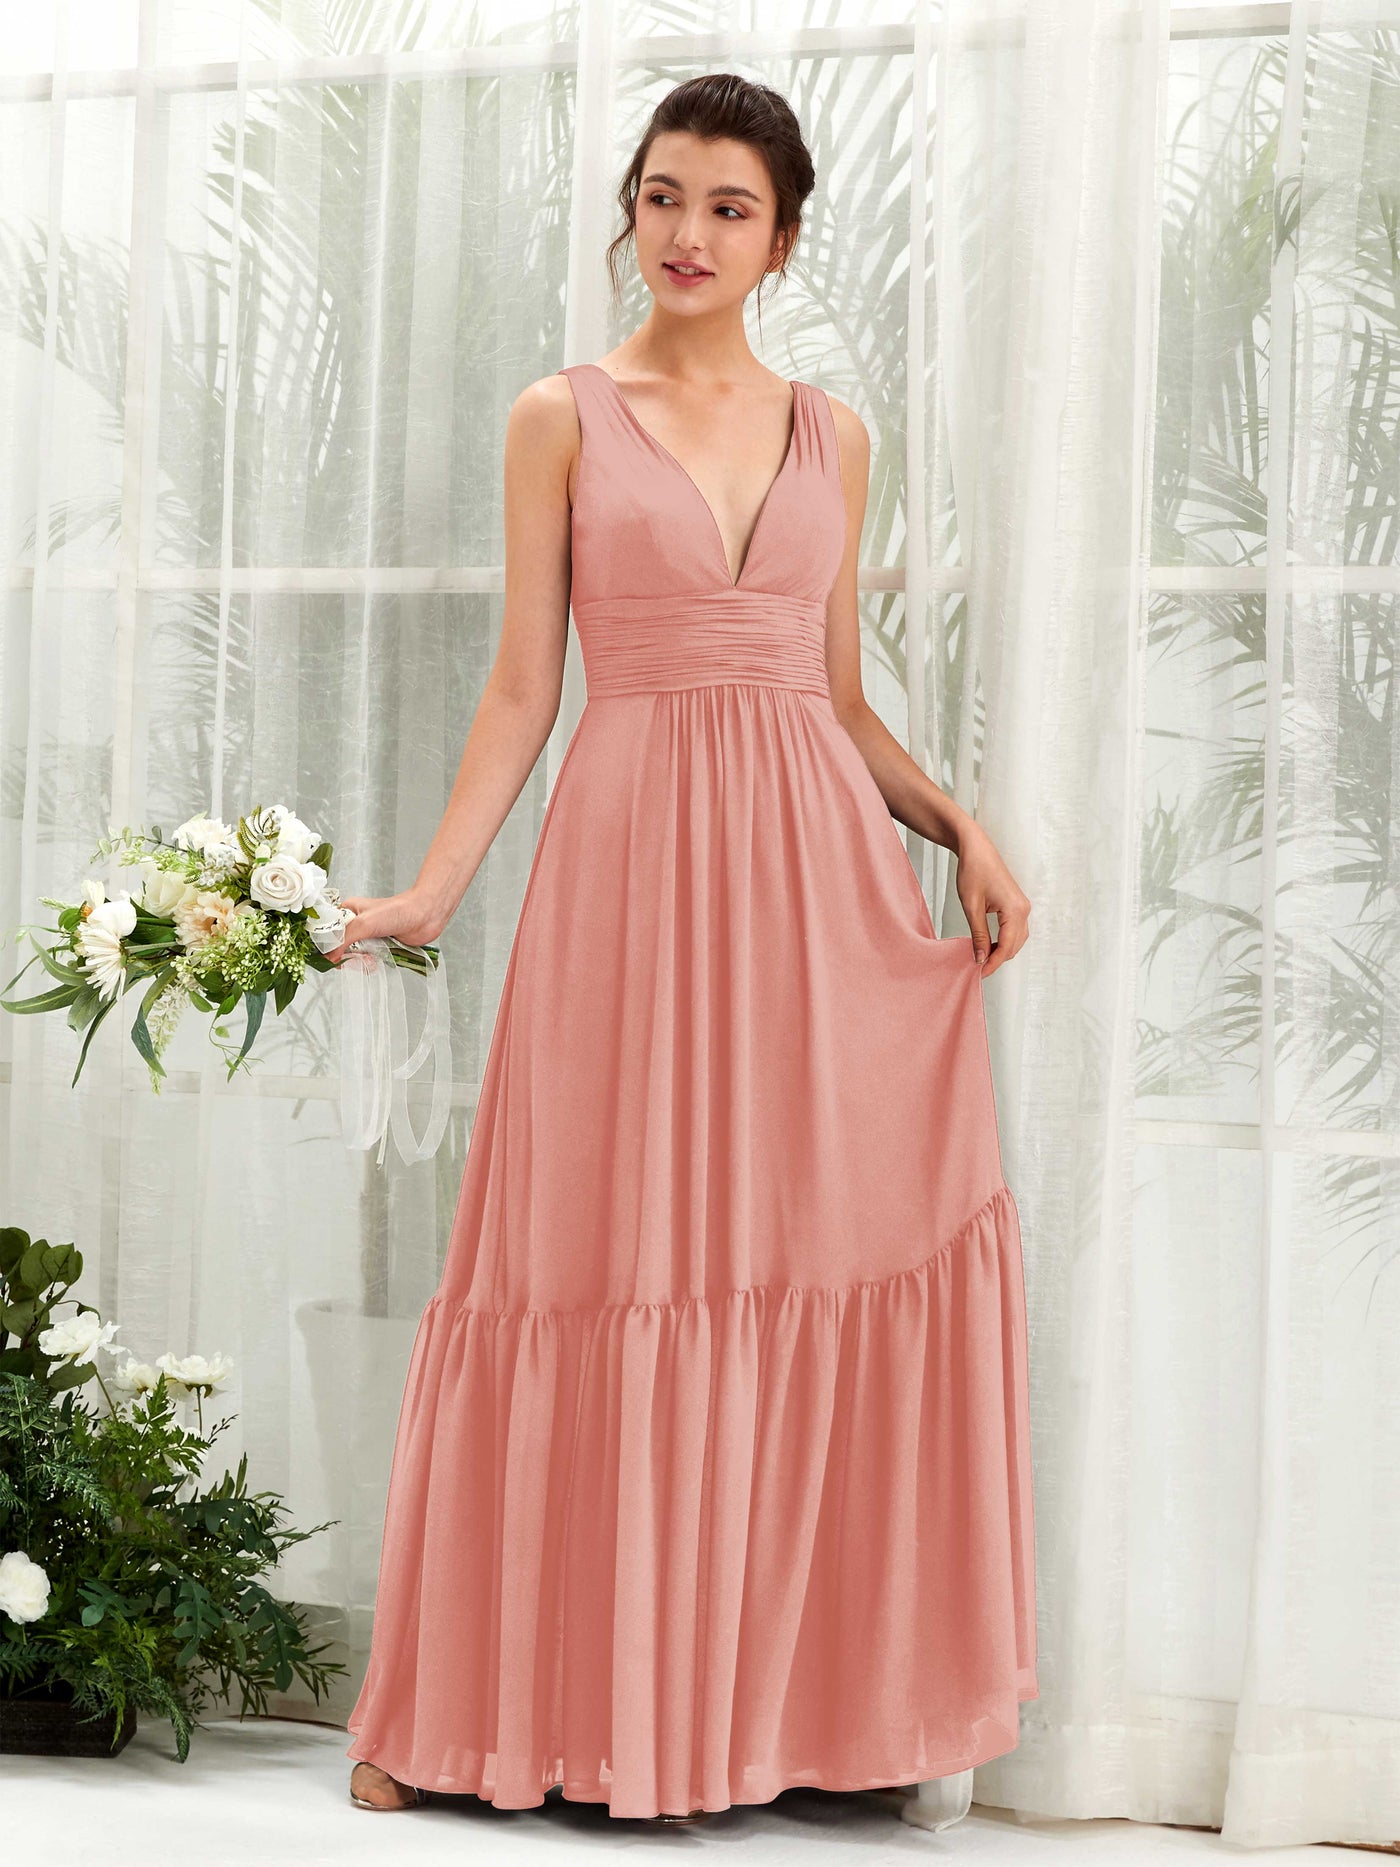 Champagne Rose Bridesmaid Dresses Bridesmaid Dress A-line Chiffon Straps Full Length Sleeveless Wedding Party Dress (80223706)#color_champagne-rose